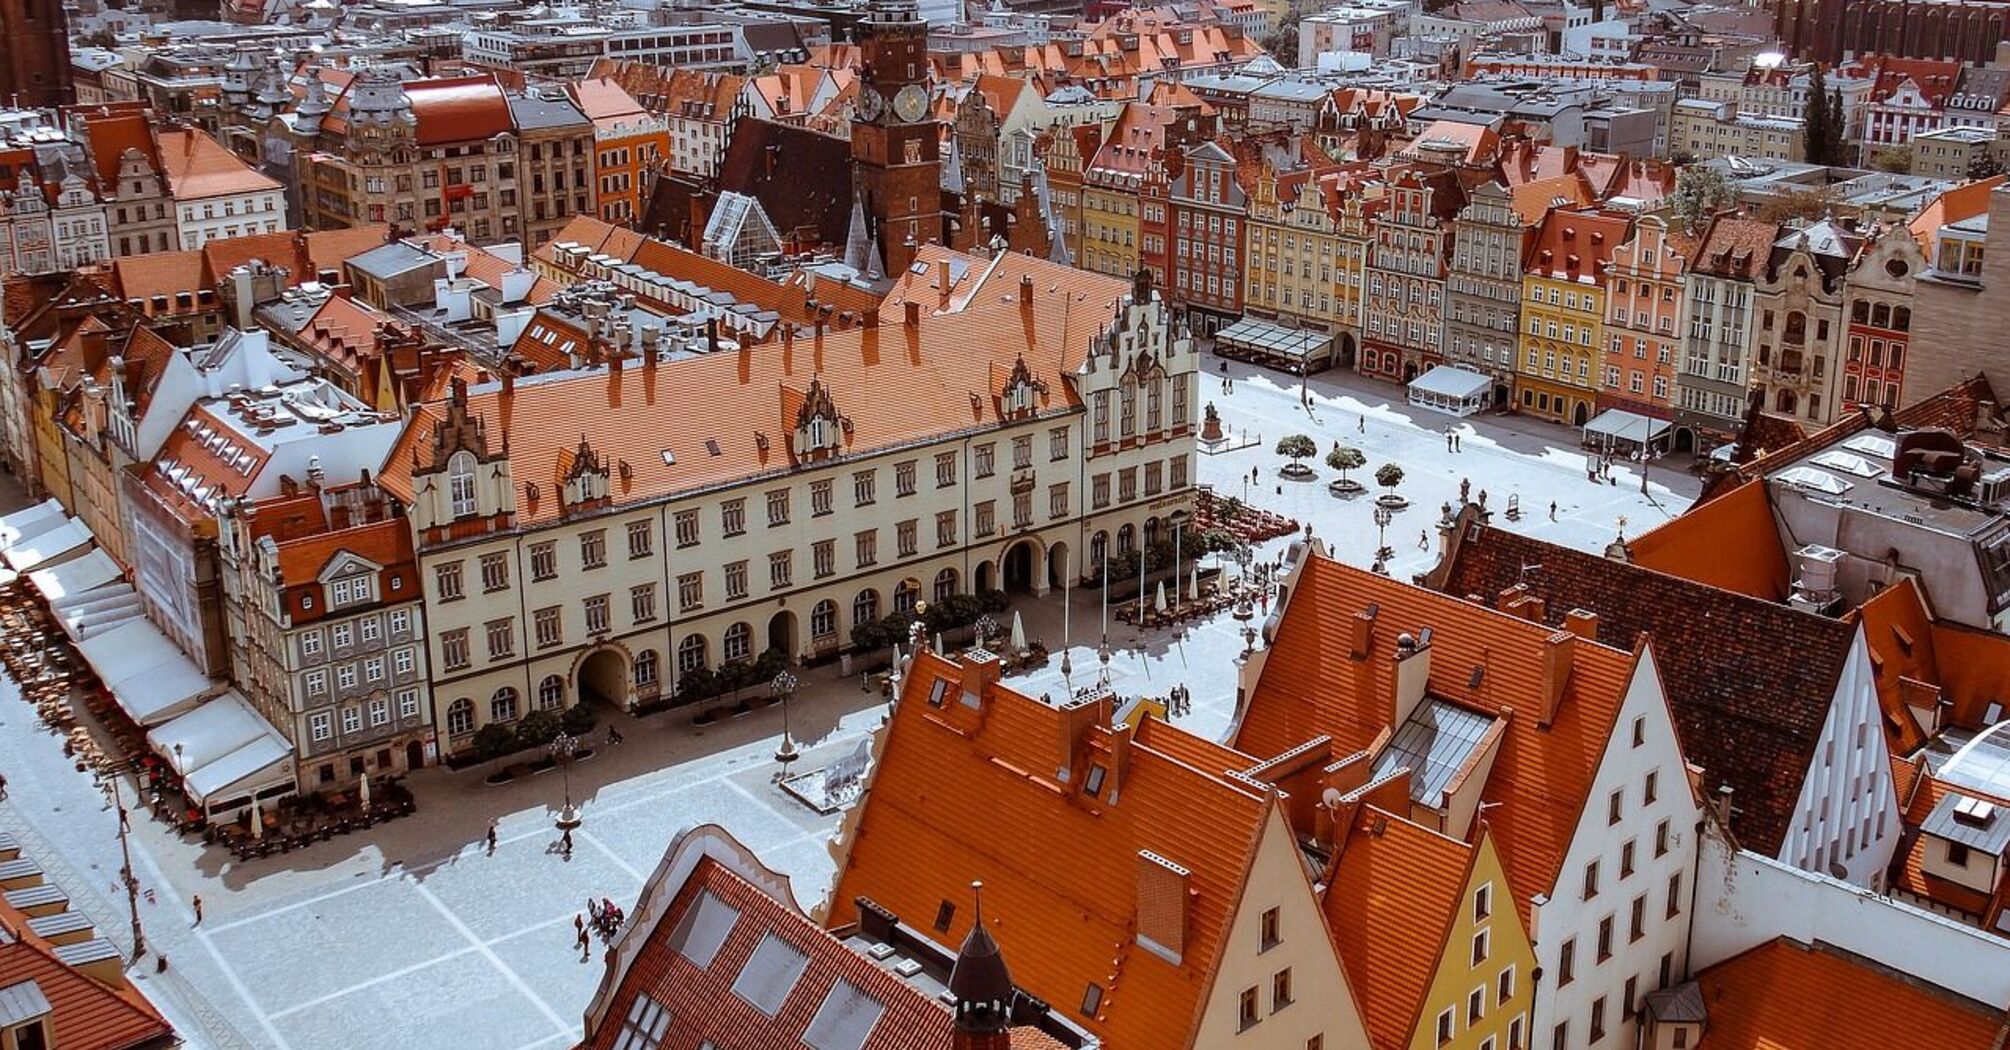 Impressive tourist attractions in Poland worth visiting